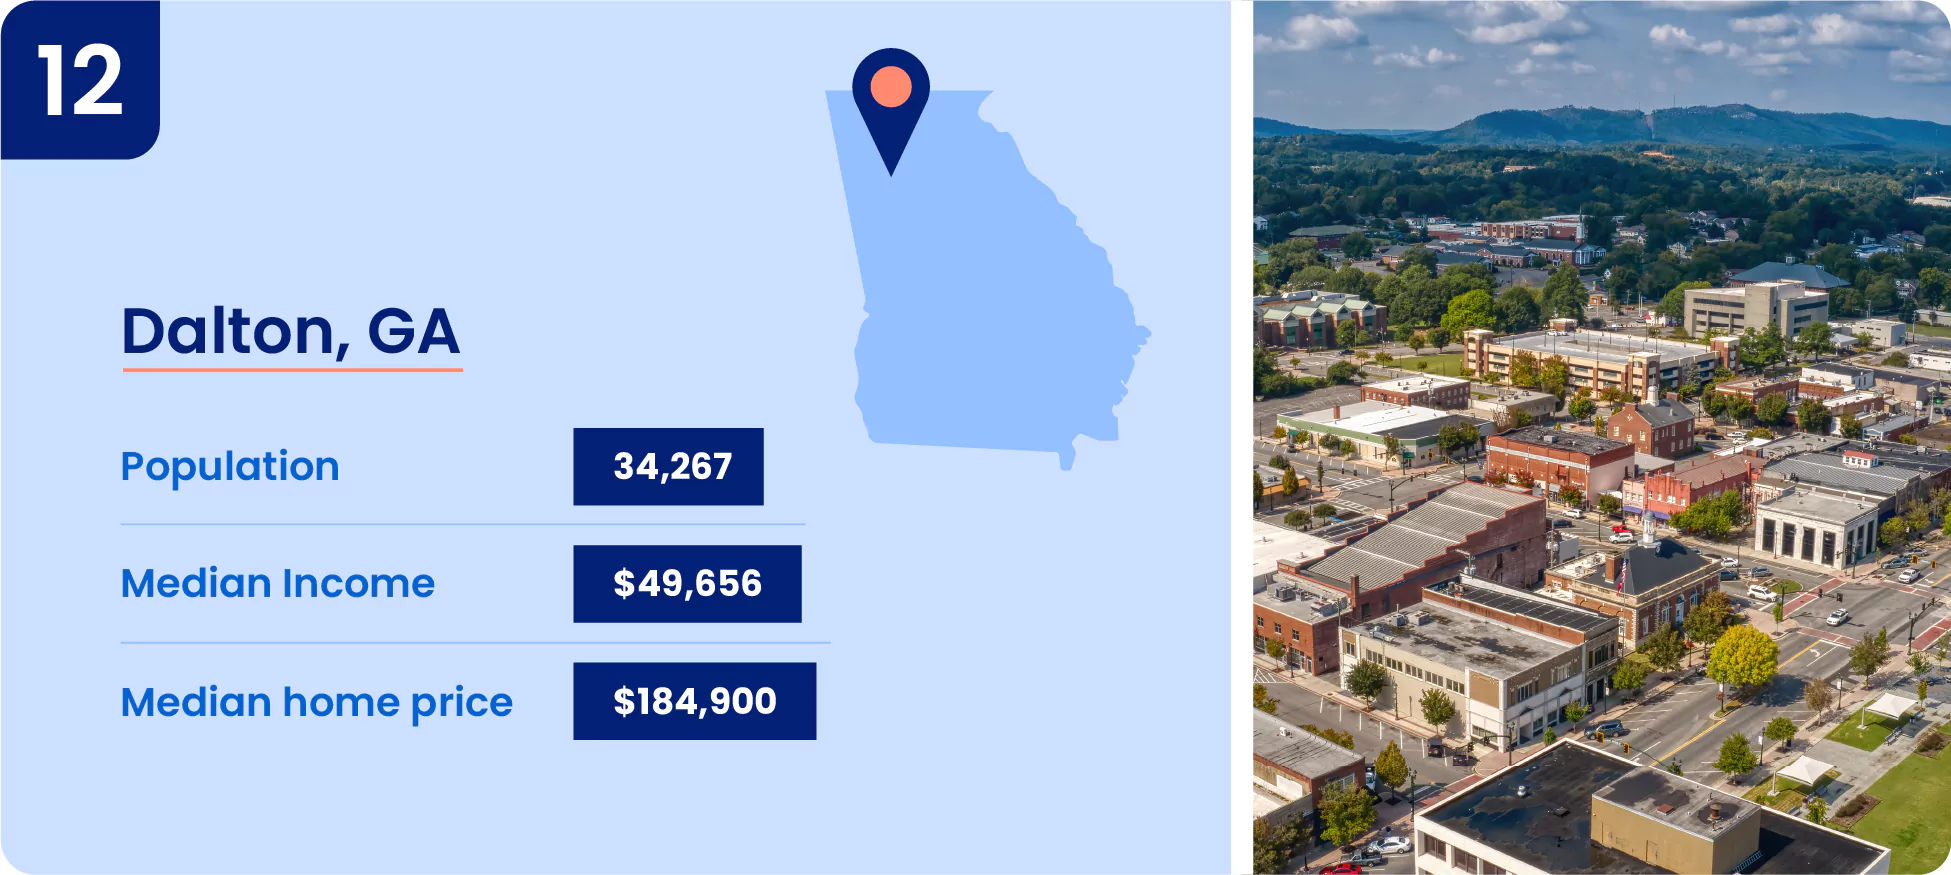 Image shows key information about one of the cheapest place to live in Georgia, the city of Dalton.